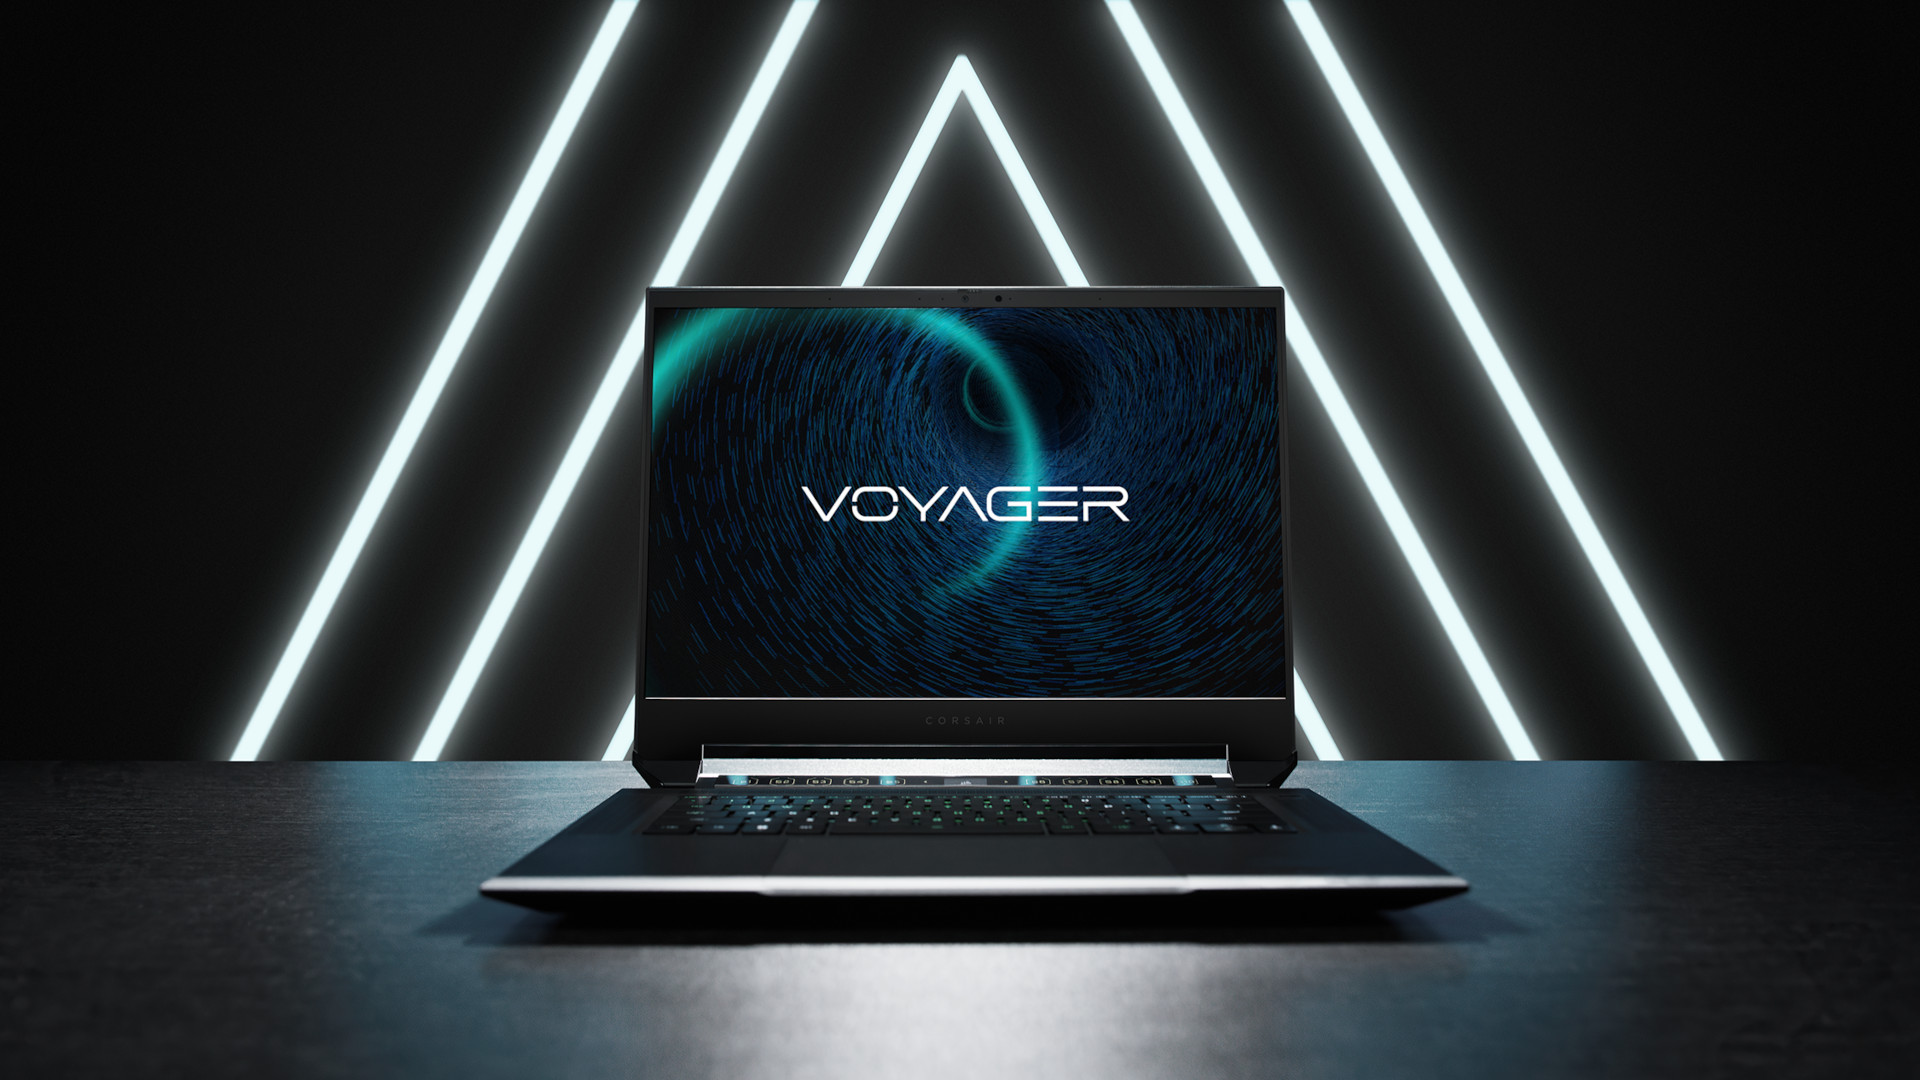 Corsair Voyager a1600 gaming laptop launches, pricing starts at $2,699